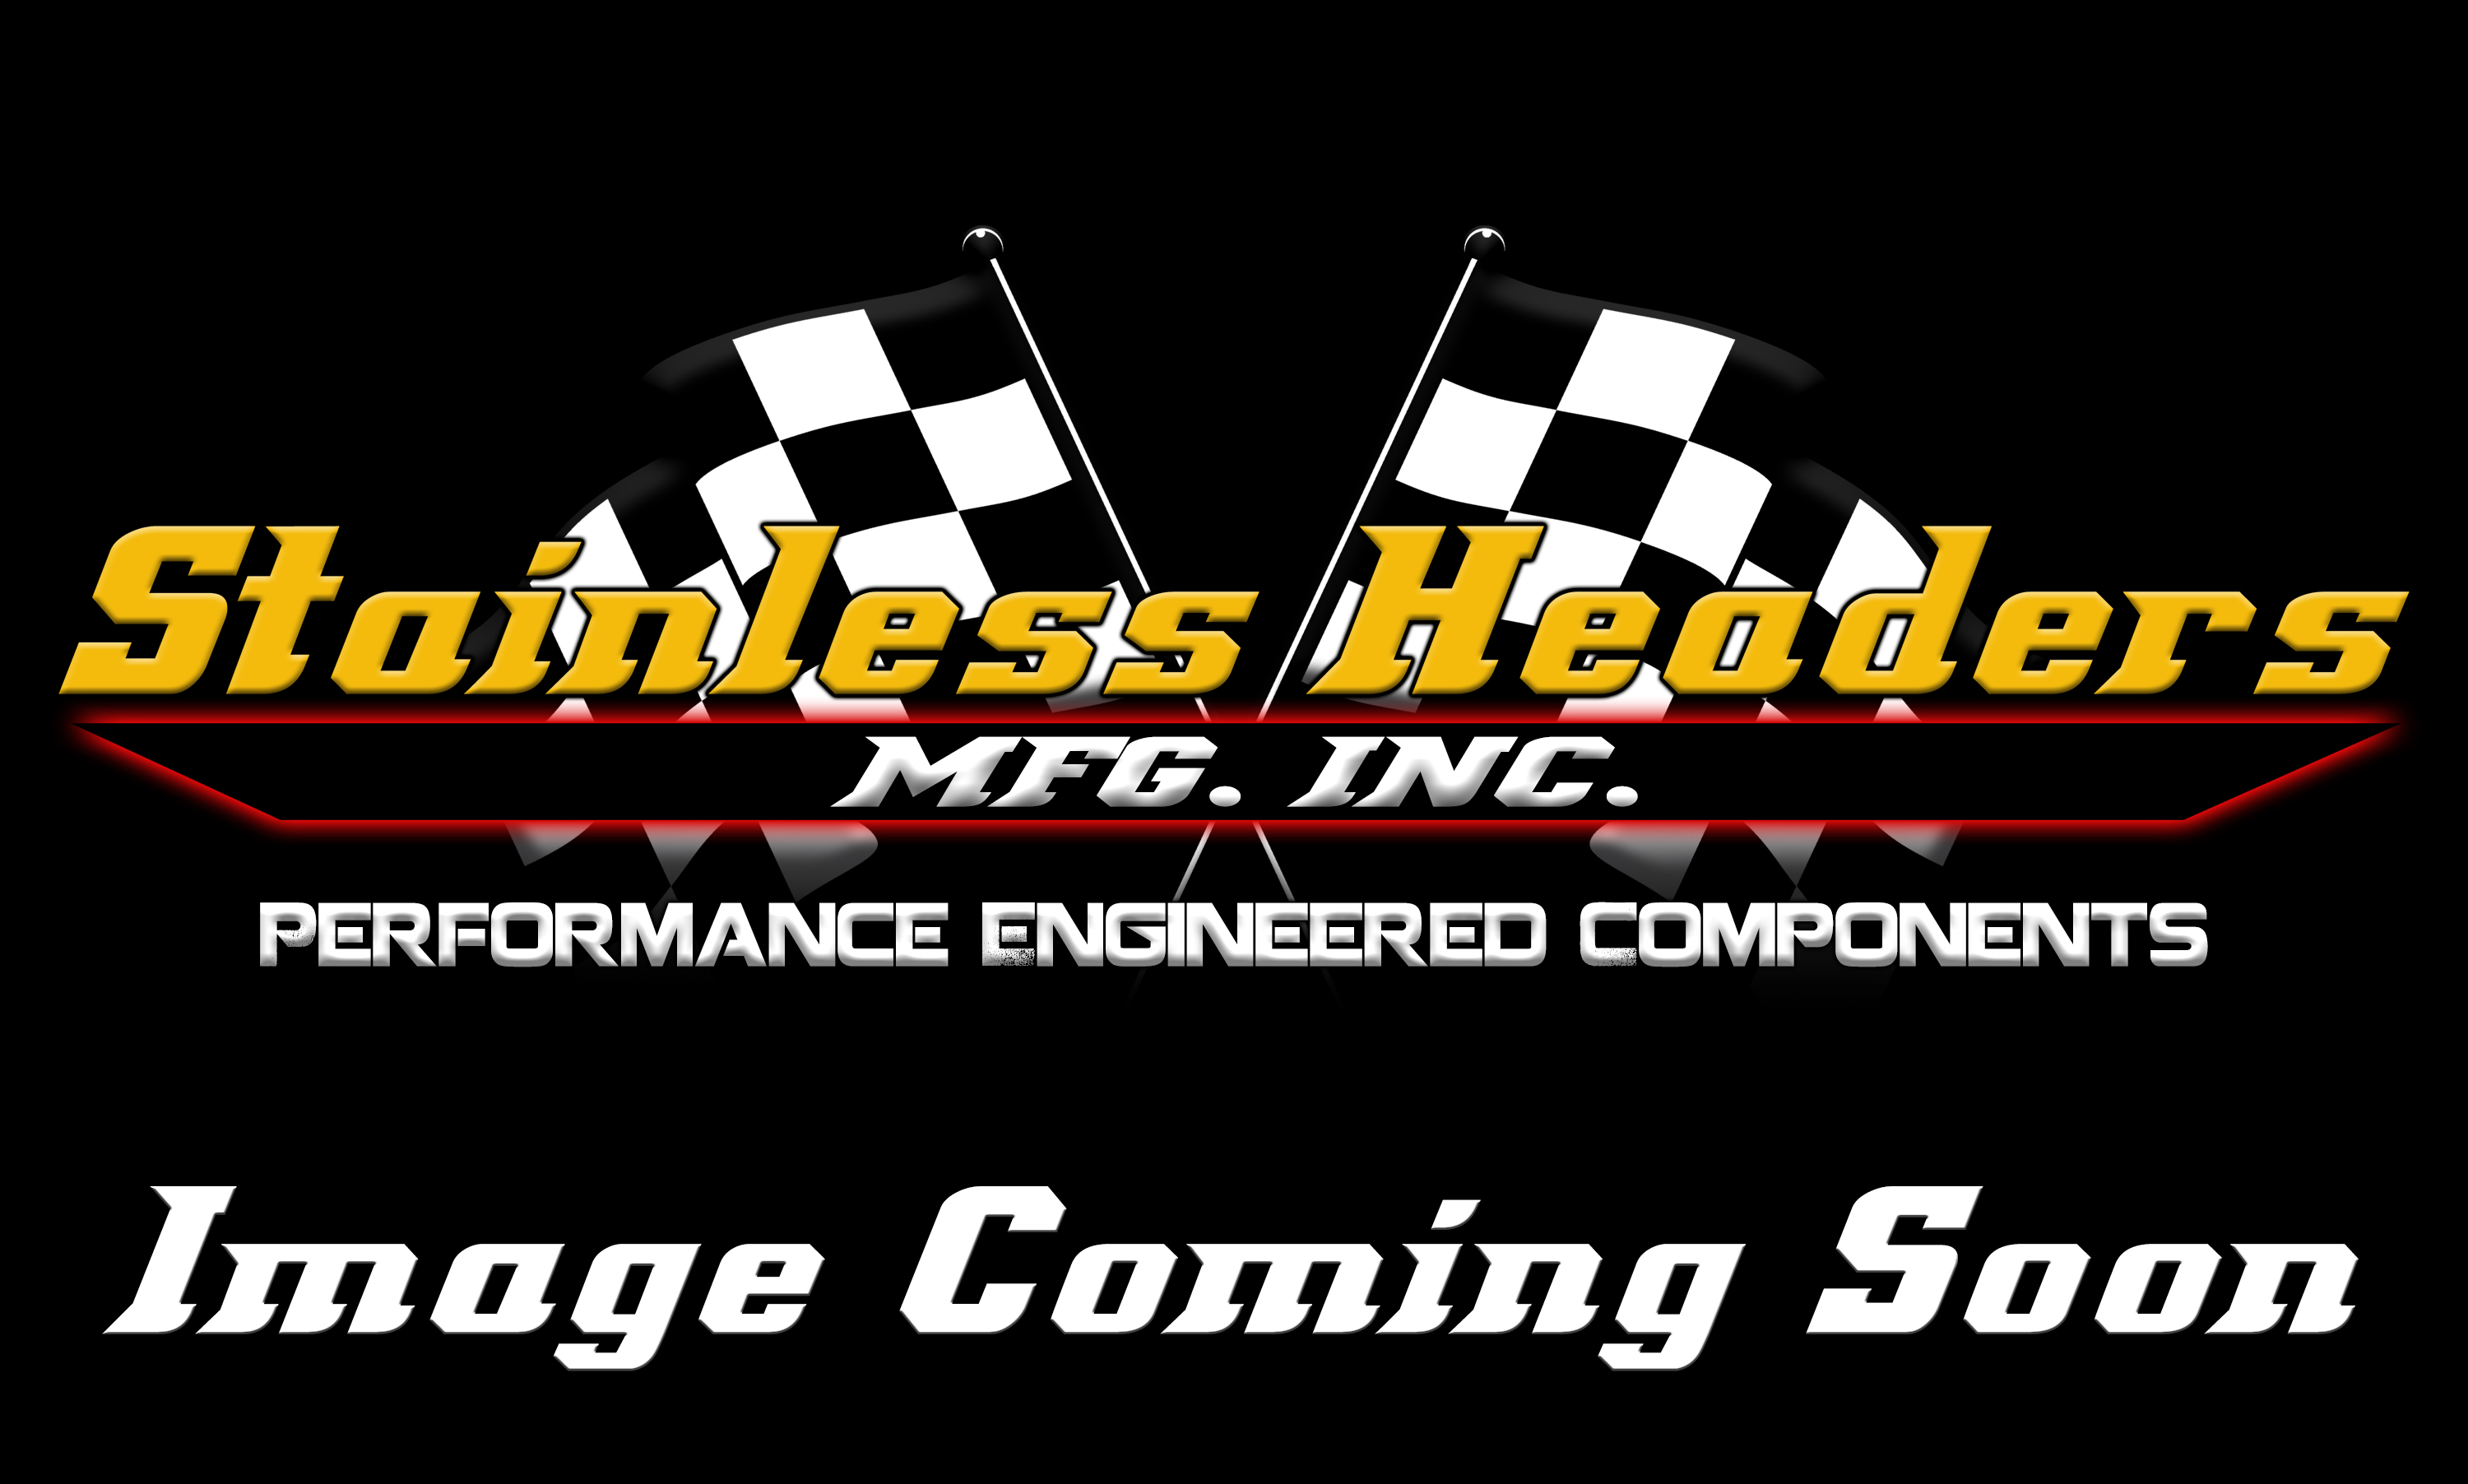 Stainless Headers - 1 7/8" Primary 3 into 1 Performance Merge Collector-16ga 304ss